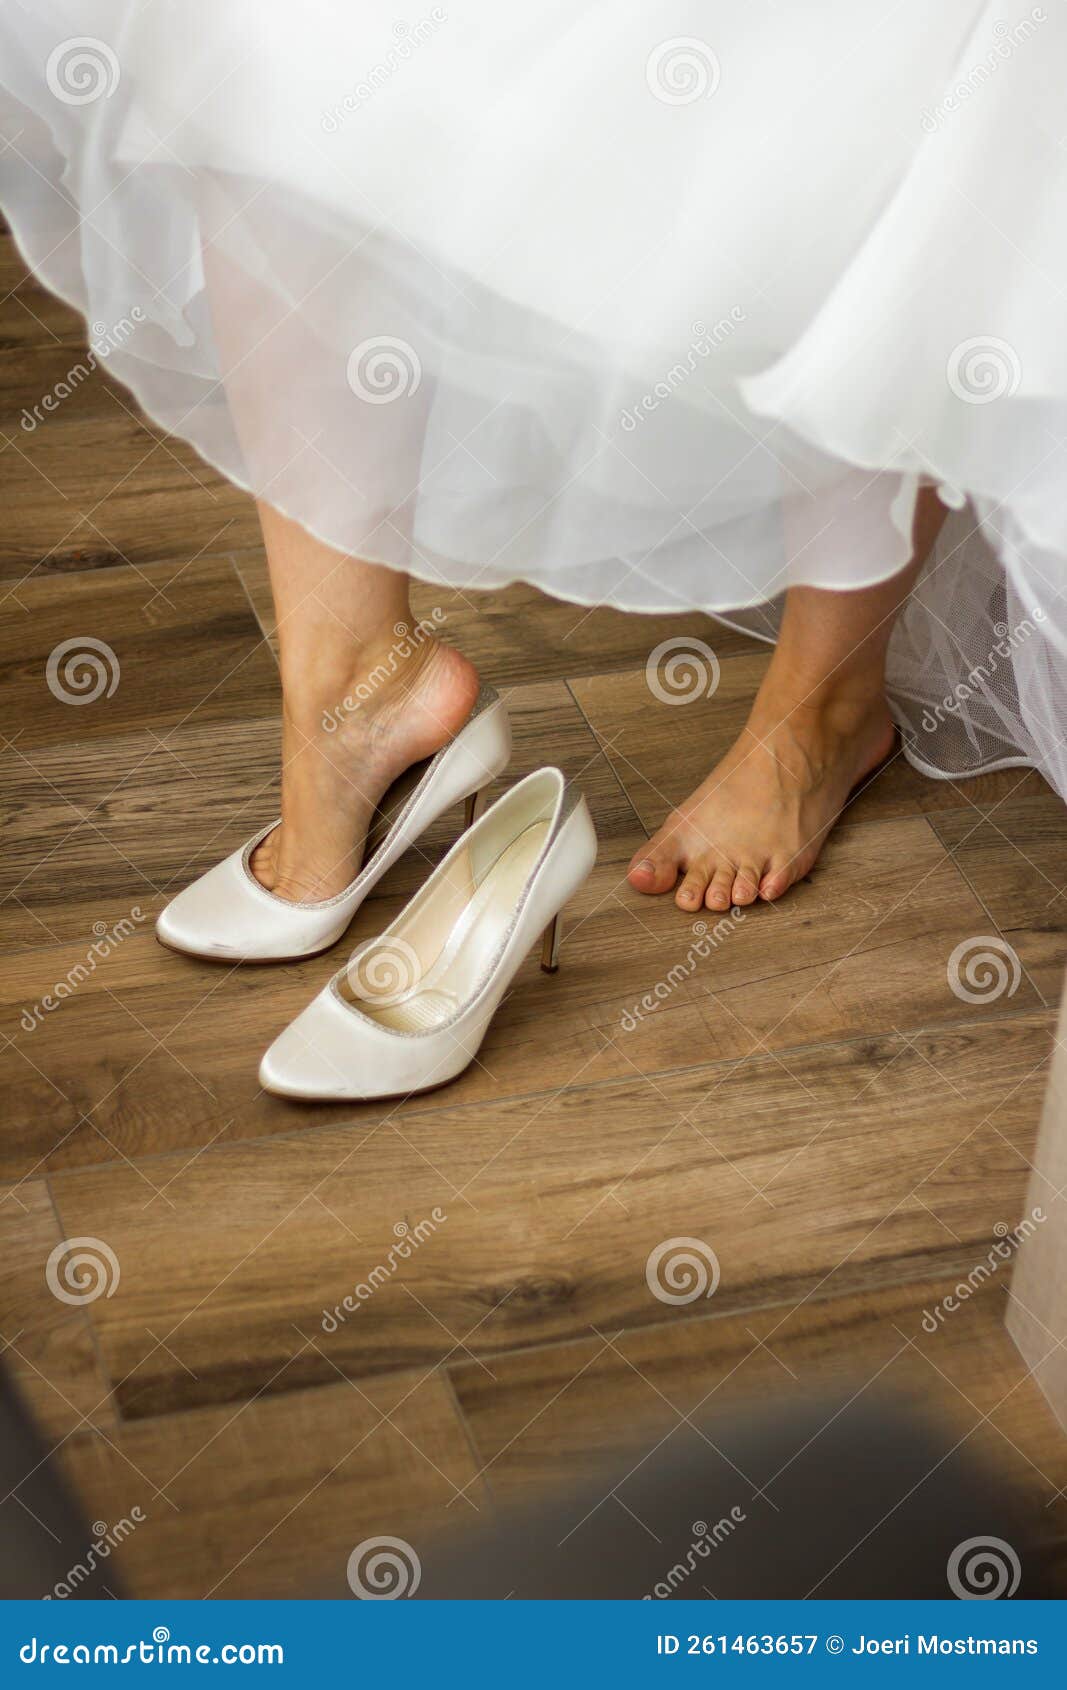 A Portrait of the Feet of a Woman Putting on Her Bridal Shoes in the ...